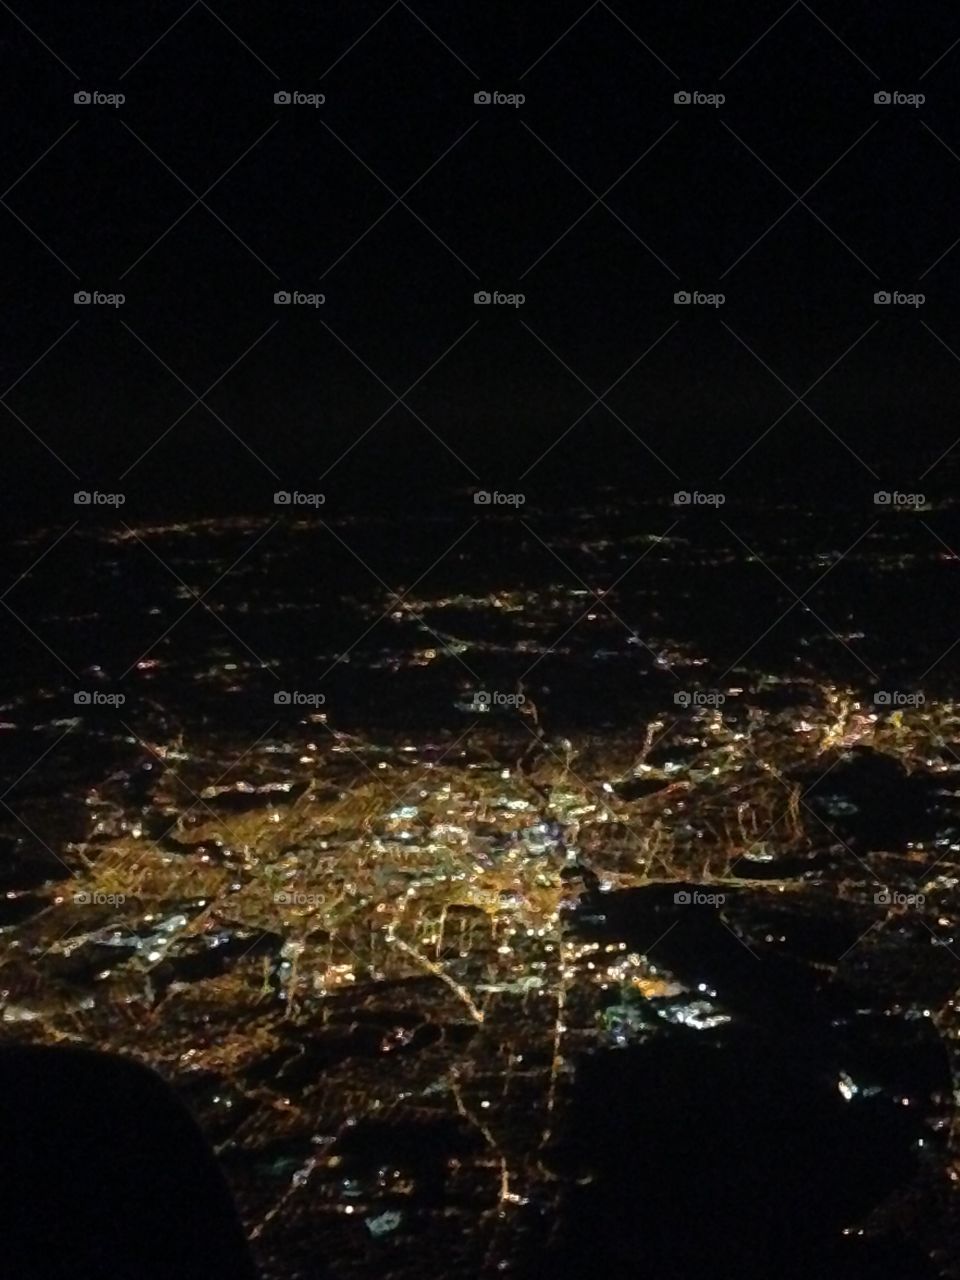 View of Florida at Night. Coming back to America from Costa Rica